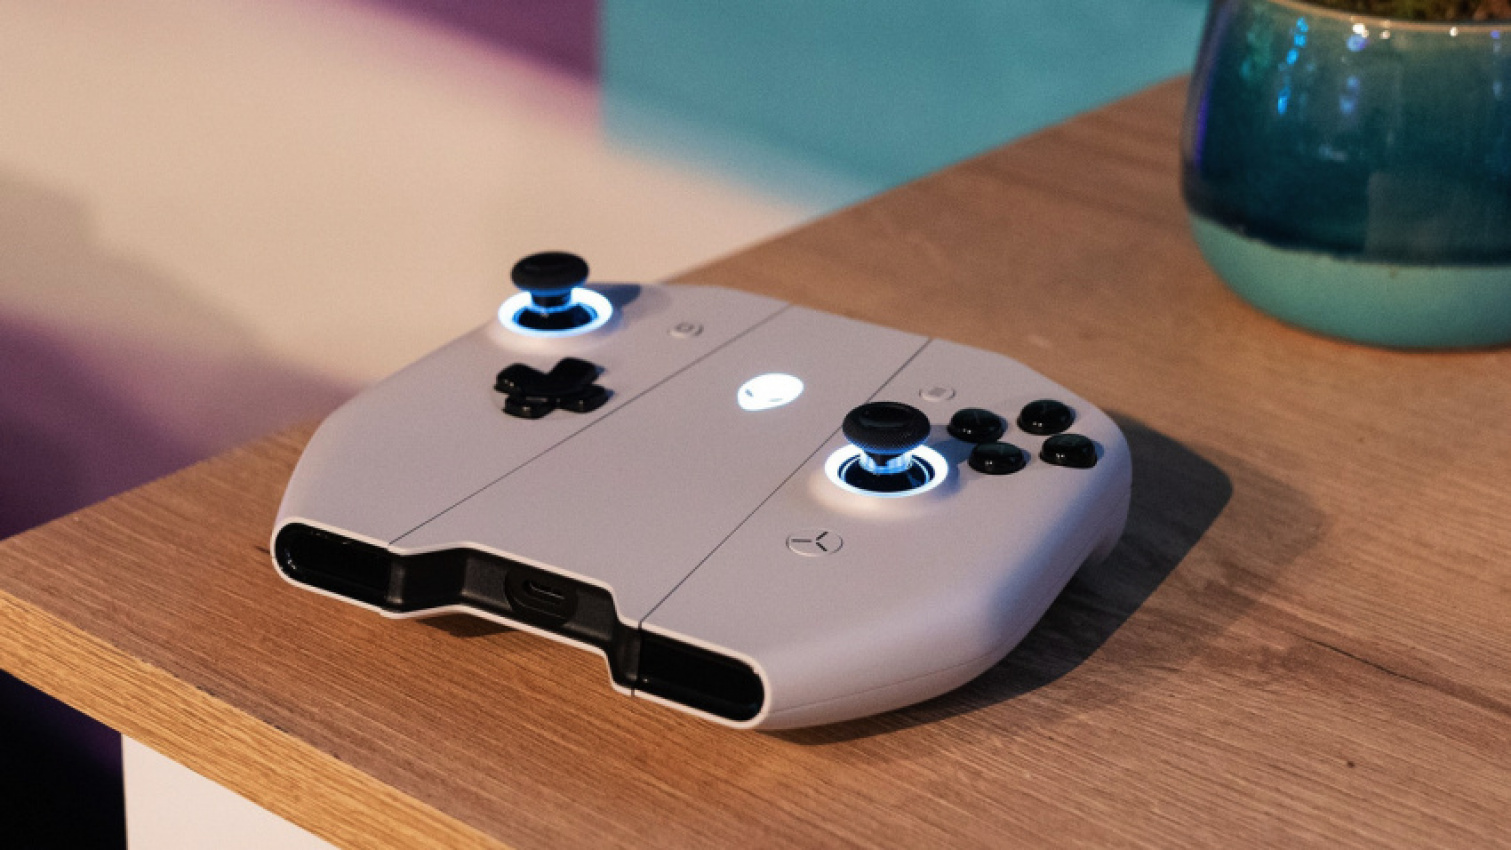 microsoft, reviews, technology, autos, microsoft, alienware’s cloudless game streaming concept brings the past to the future